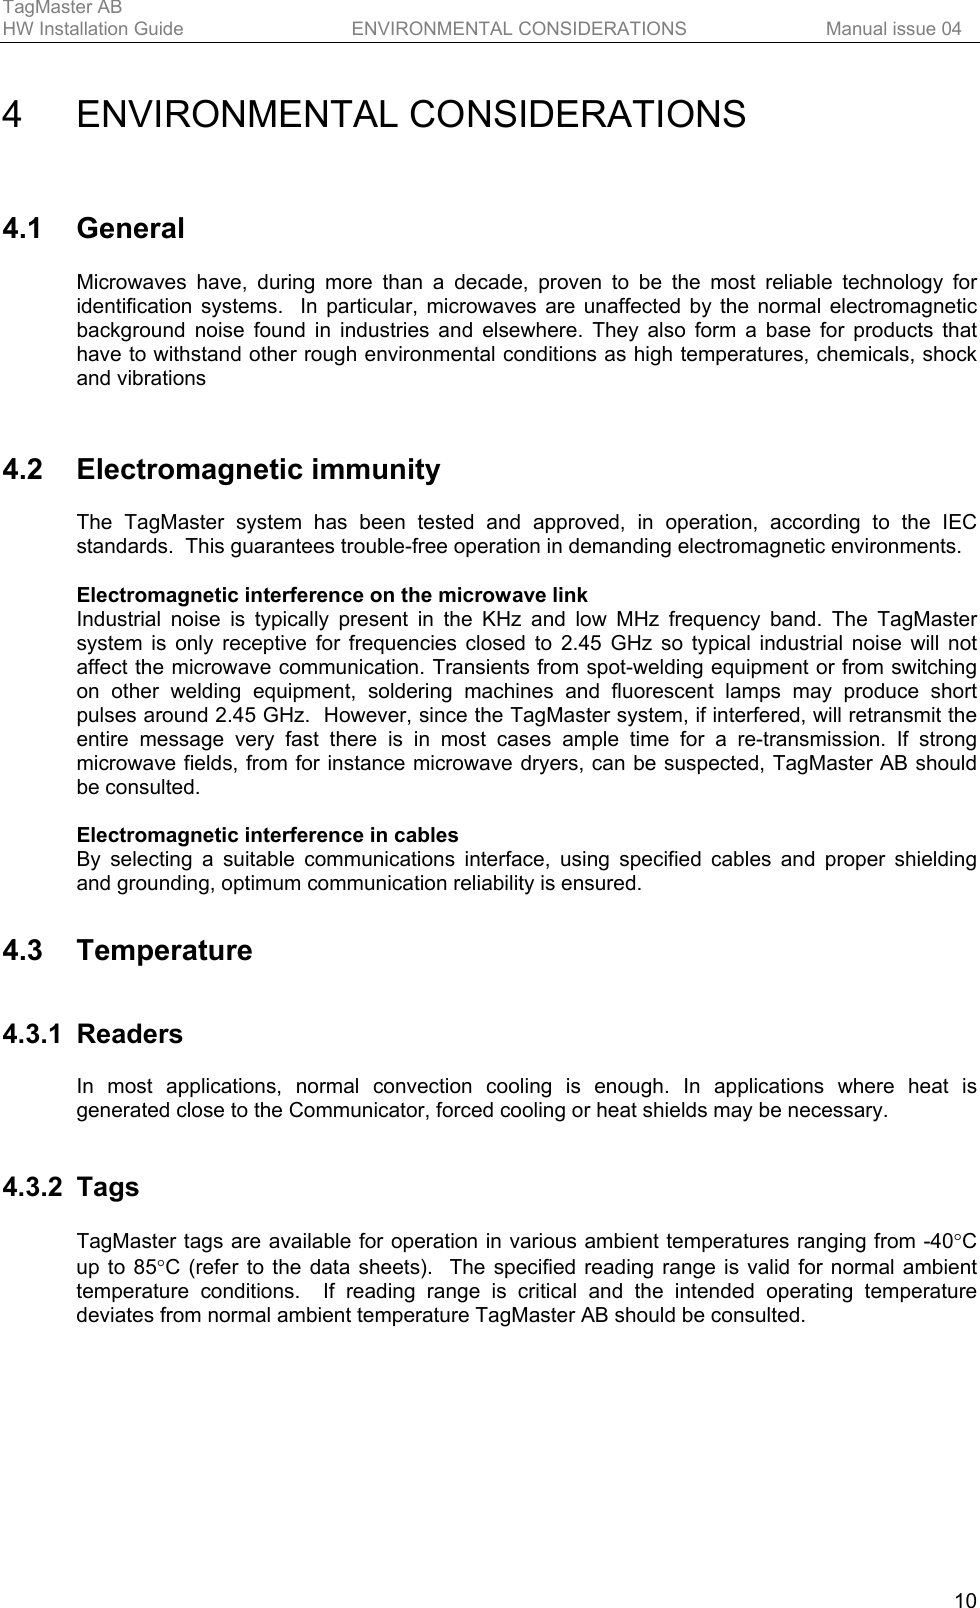 TagMaster AB     HW Installation Guide  ENVIRONMENTAL CONSIDERATIONS  Manual issue 04  10 4 ENVIRONMENTAL CONSIDERATIONS 4.1 General Microwaves have, during more than a decade, proven to be the most reliable technology for identification systems.  In particular, microwaves are unaffected by the normal electromagnetic background noise found in industries and elsewhere. They also form a base for products that have to withstand other rough environmental conditions as high temperatures, chemicals, shock and vibrations   4.2 Electromagnetic immunity The TagMaster system has been tested and approved, in operation, according to the IEC standards.  This guarantees trouble-free operation in demanding electromagnetic environments.  Electromagnetic interference on the microwave link Industrial noise is typically present in the KHz and low MHz frequency band. The TagMaster system is only receptive for frequencies closed to 2.45 GHz so typical industrial noise will not affect the microwave communication. Transients from spot-welding equipment or from switching on other welding equipment, soldering machines and fluorescent lamps may produce short pulses around 2.45 GHz.  However, since the TagMaster system, if interfered, will retransmit the entire message very fast there is in most cases ample time for a re-transmission. If strong microwave fields, from for instance microwave dryers, can be suspected, TagMaster AB should be consulted.  Electromagnetic interference in cables By selecting a suitable communications interface, using specified cables and proper shielding and grounding, optimum communication reliability is ensured. 4.3 Temperature 4.3.1 Readers In most applications, normal convection cooling is enough. In applications where heat is generated close to the Communicator, forced cooling or heat shields may be necessary.   4.3.2 Tags TagMaster tags are available for operation in various ambient temperatures ranging from -40°C up to 85°C (refer to the data sheets).  The specified reading range is valid for normal ambient temperature conditions.  If reading range is critical and the intended operating temperature deviates from normal ambient temperature TagMaster AB should be consulted. 